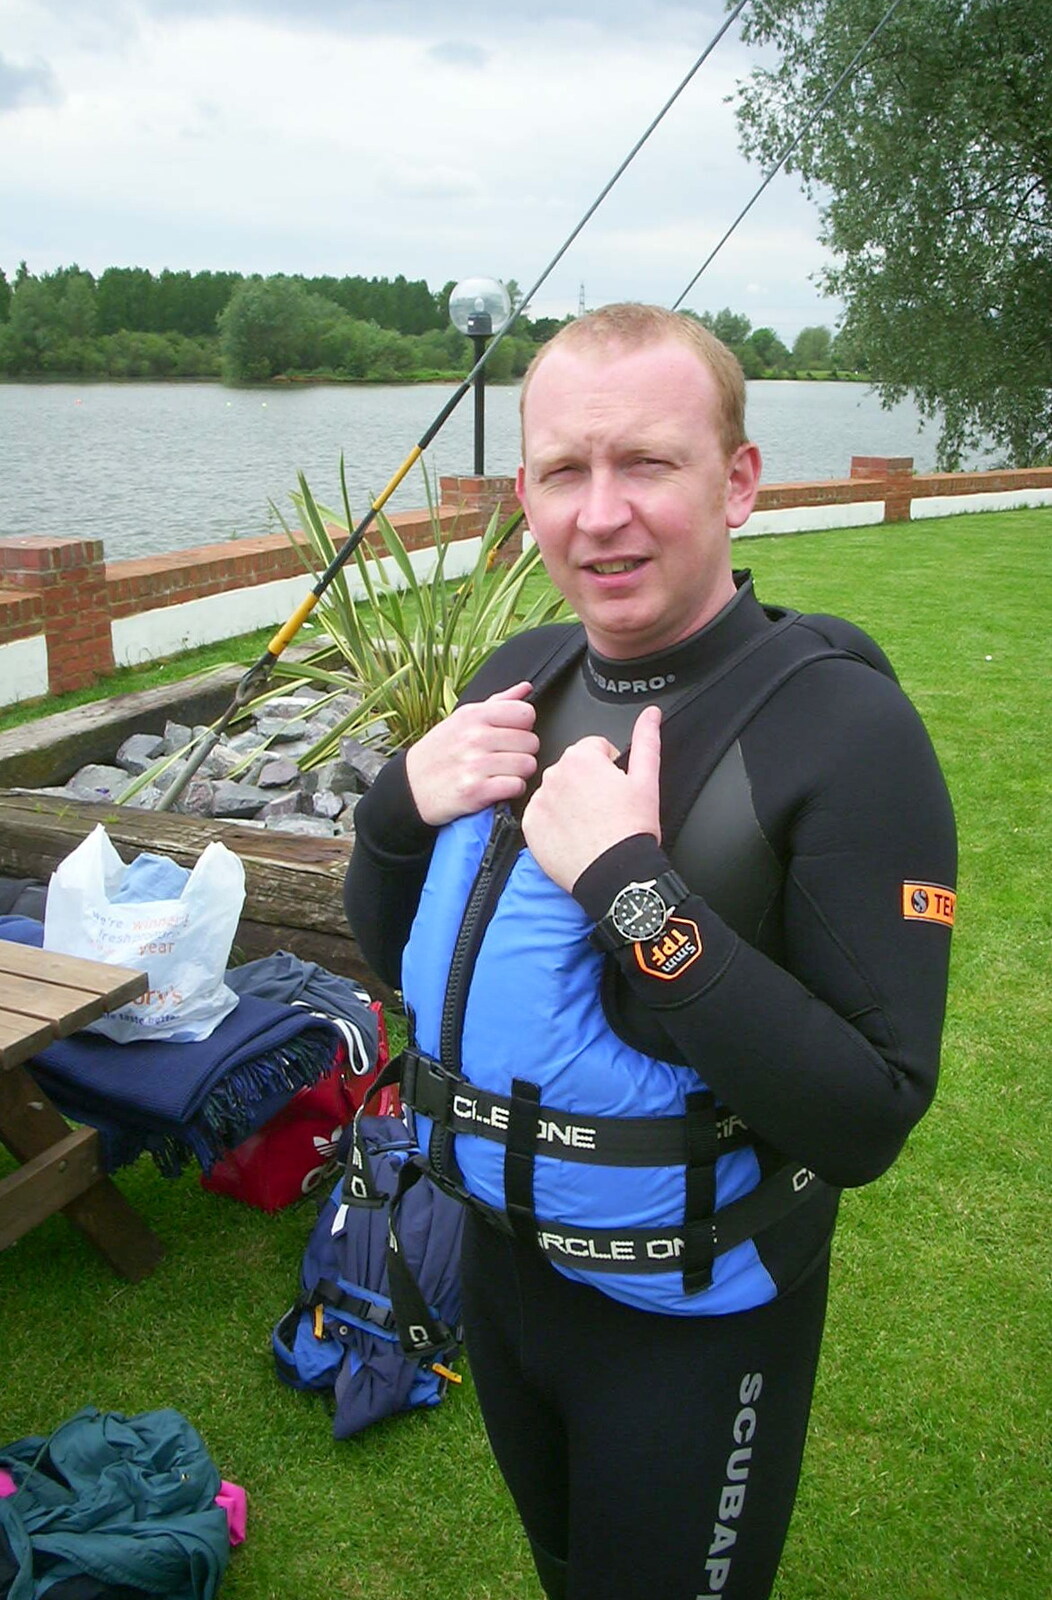 3G Lab Watersports Fun Day, Wyboston, Bedfordshire - 8th June 2002: Julian shows off his life jacket